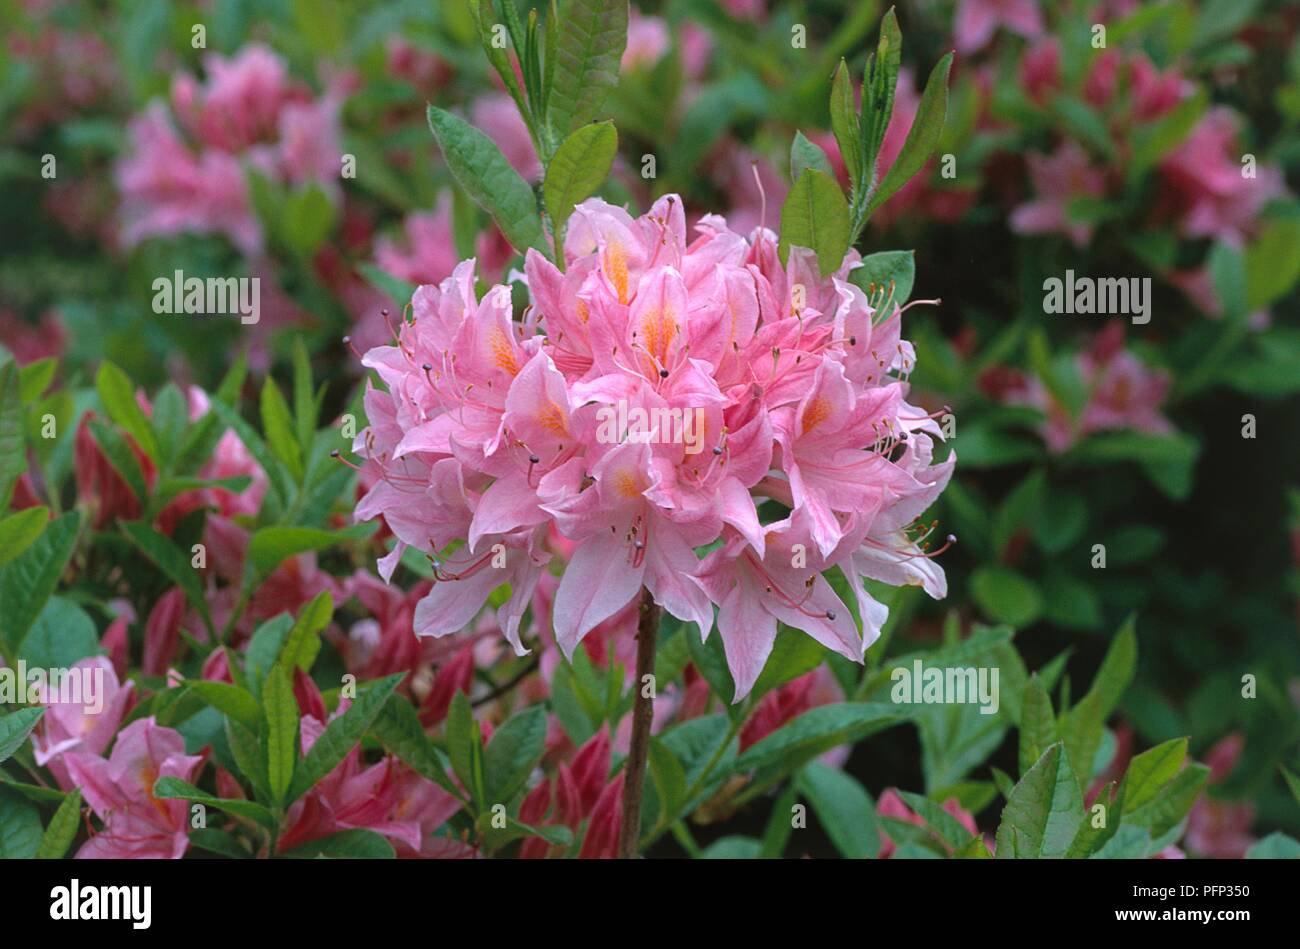 Rhododendron 'Reve d'Amour', cluster of pink flowers, close-up Stock Photo